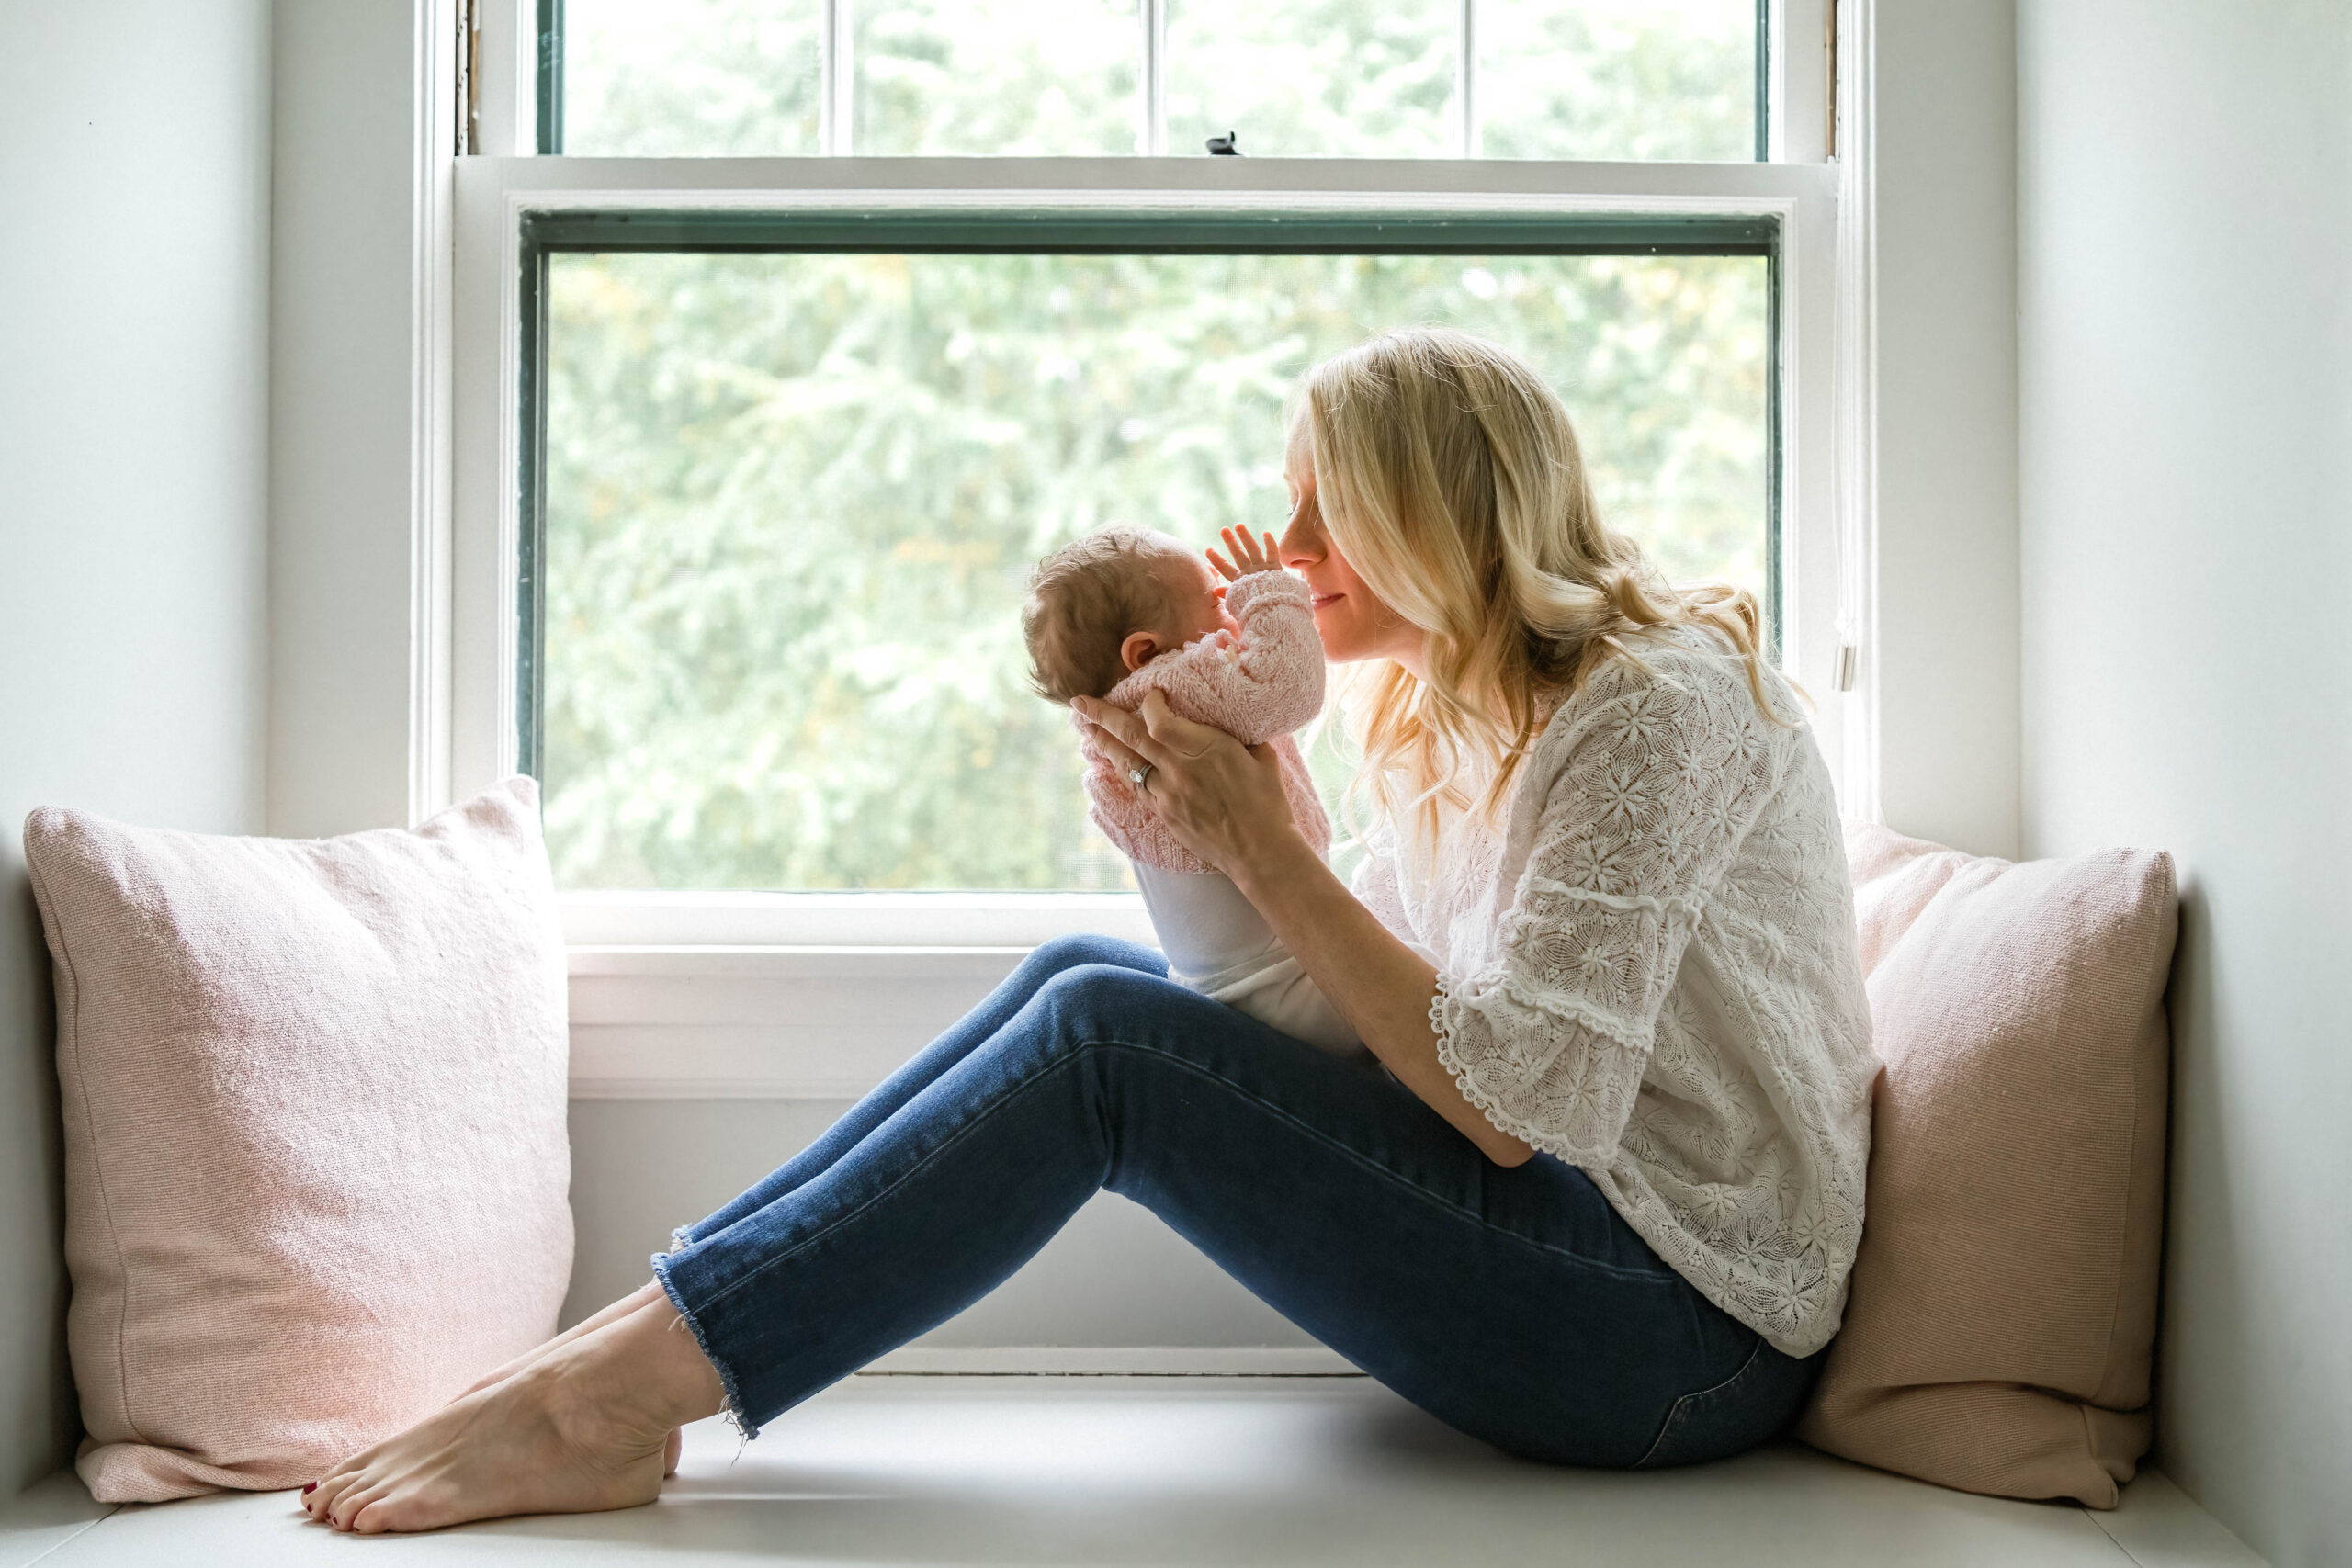 Image of mother and newborn daughter sitting in window seat